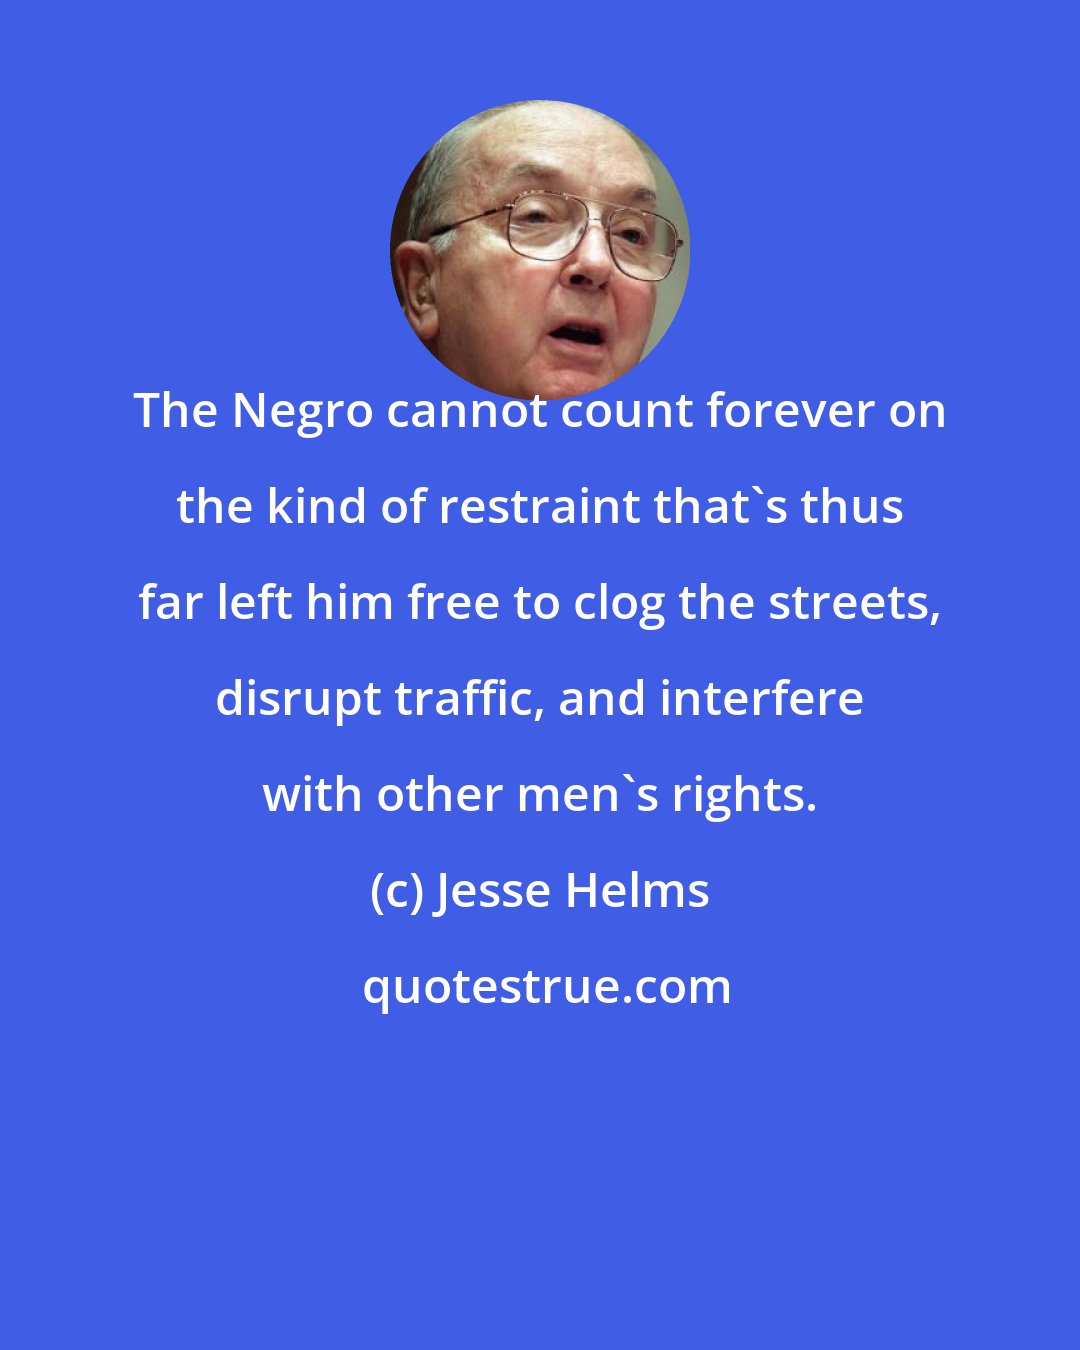 Jesse Helms: The Negro cannot count forever on the kind of restraint that's thus far left him free to clog the streets, disrupt traffic, and interfere with other men's rights.